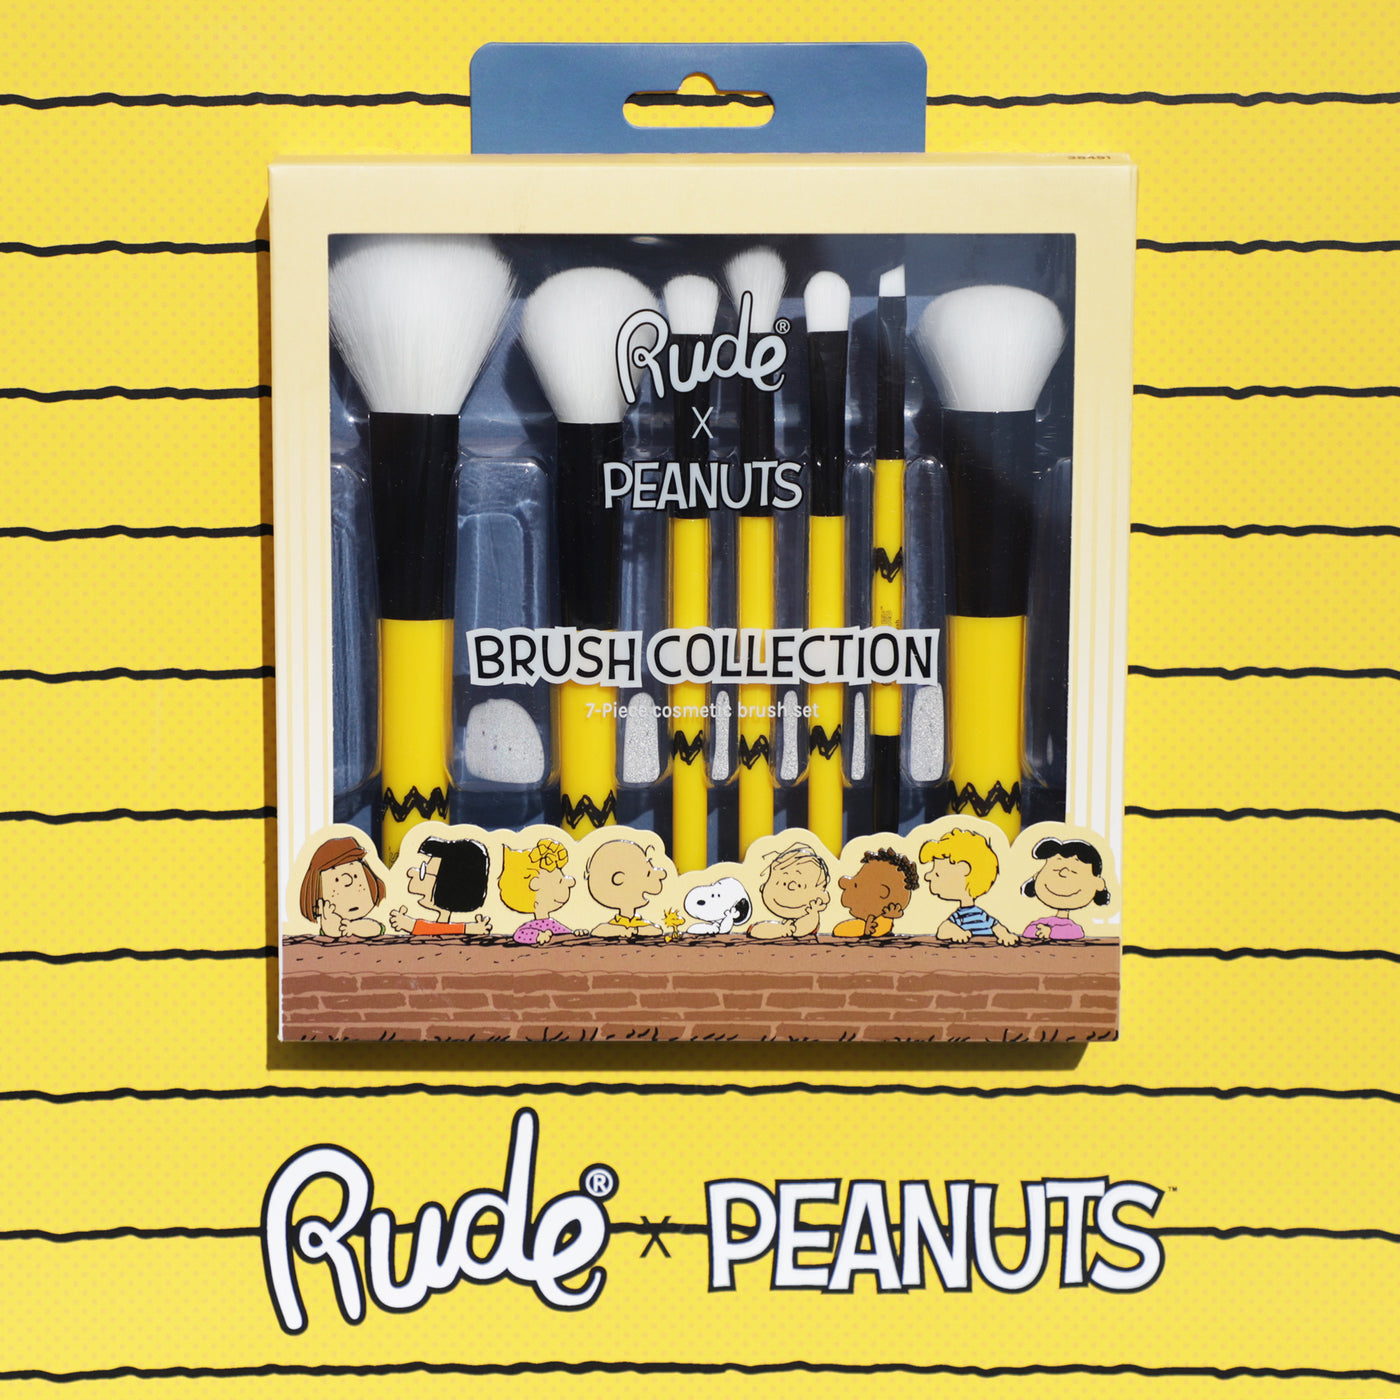 Rude Peanuts Brush Collection